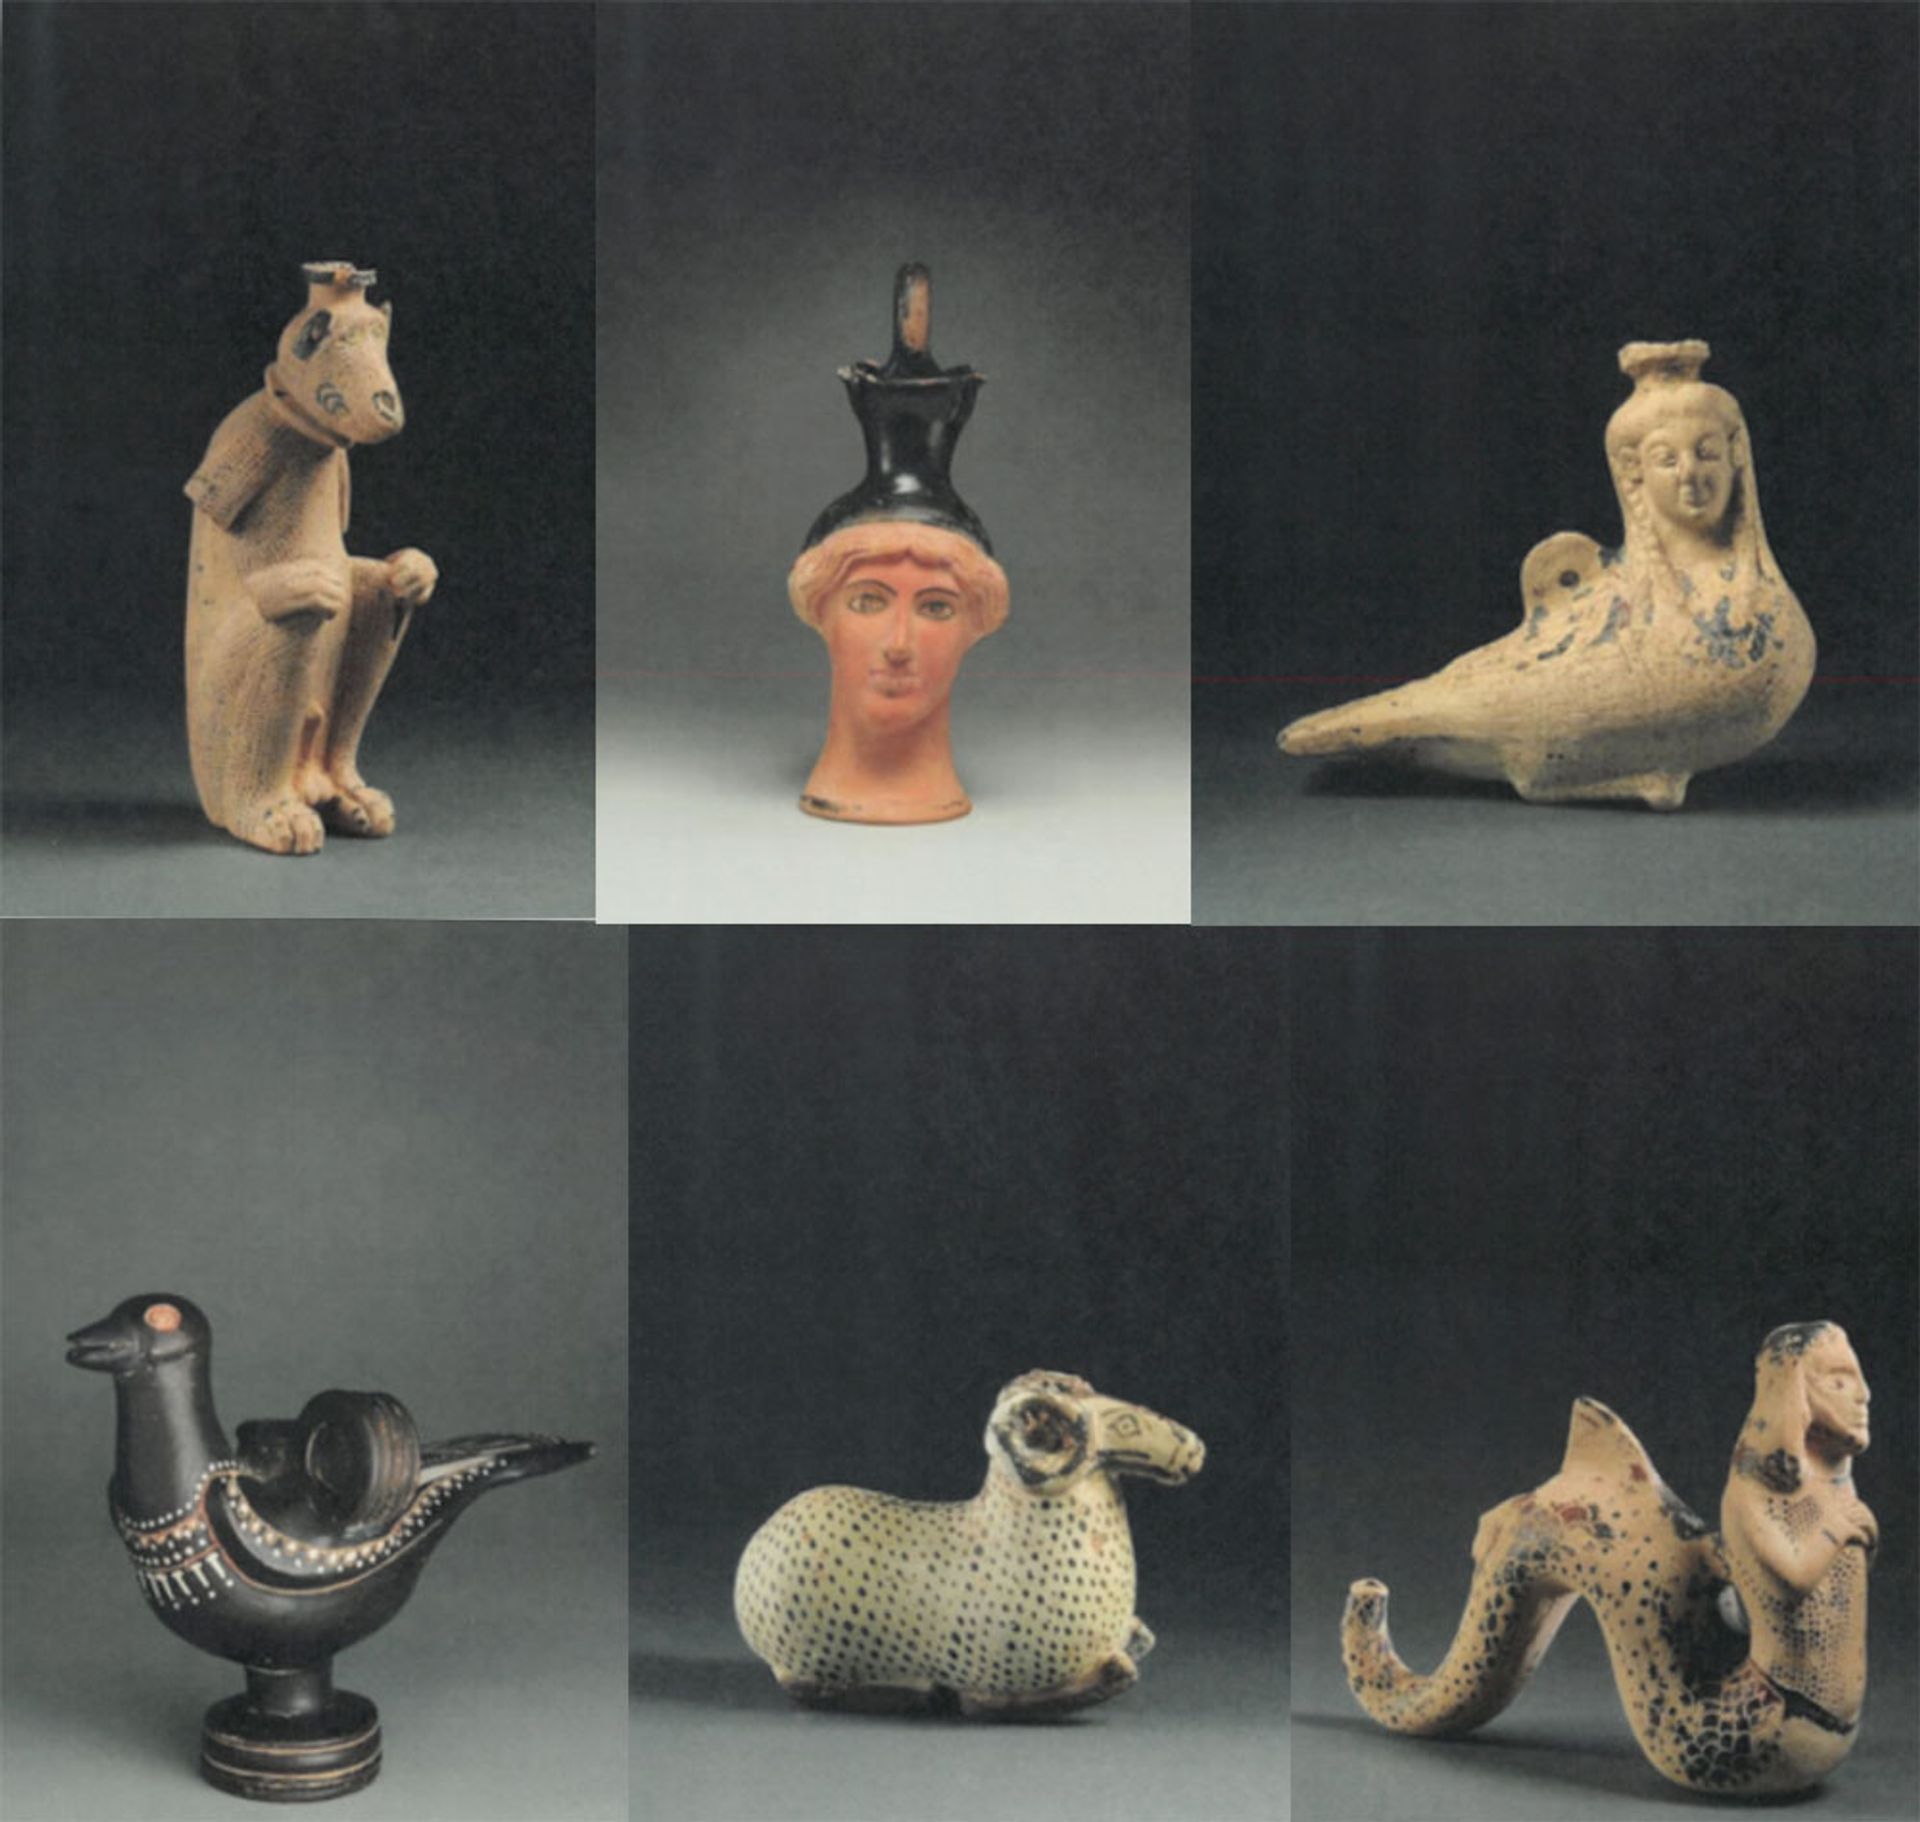 The six objects seized by authorities from Phoenix Ancient art: Rhodian Seated Monkey with missing arms, dating to 580-550 BC, valued at $150,000; Attic Female Head Flask, dating to 500-490 BC, valued at $80,000; Ionian figural vessel representing a Siren, dating to 500-525 BC, valued at $35,000; Teano Ware figural representing a Dove, dating to 330-300 BC, valued at $25,000; Corinthian figural representing a Ram, dating to the 6th century BC, valued at $20,000; and Corinthian figural representing a Sea-Serpent with a human torso and head of a man, dating to the 6th century BC, valued at: $140,000 art-crime.blogspot.com